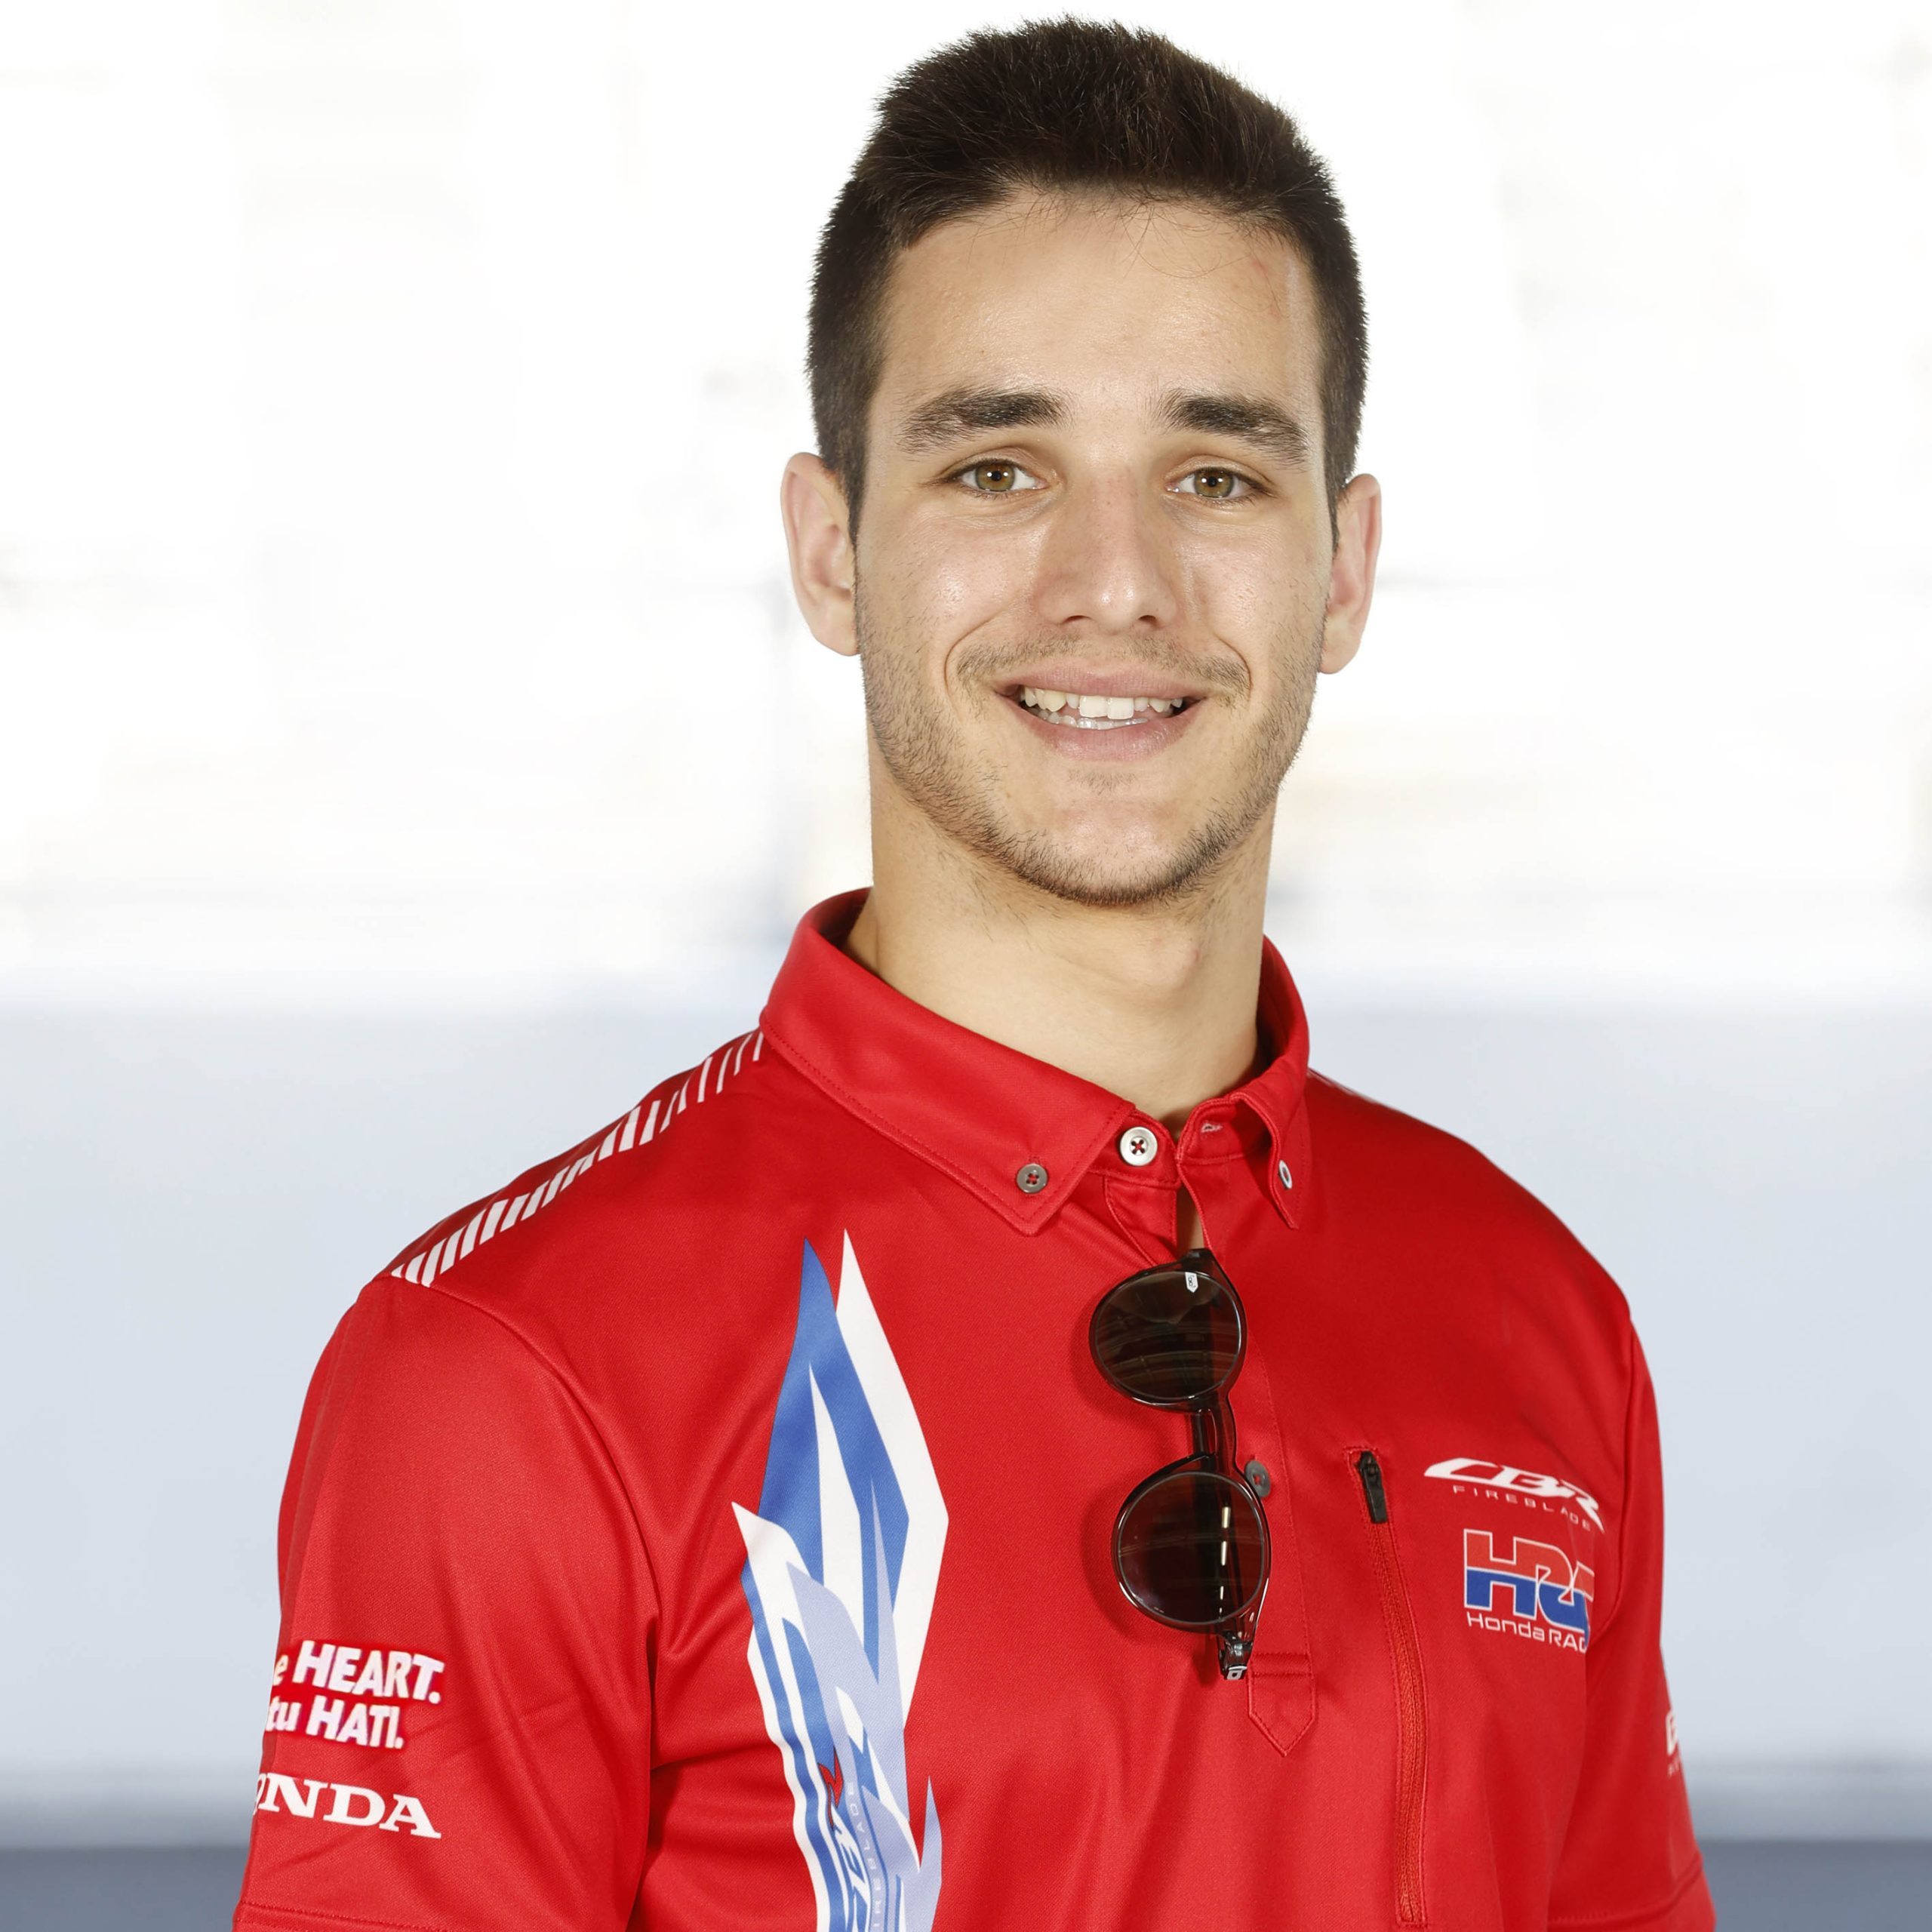 Iker Lecuona To Replace Alex Rins At The Silverstone